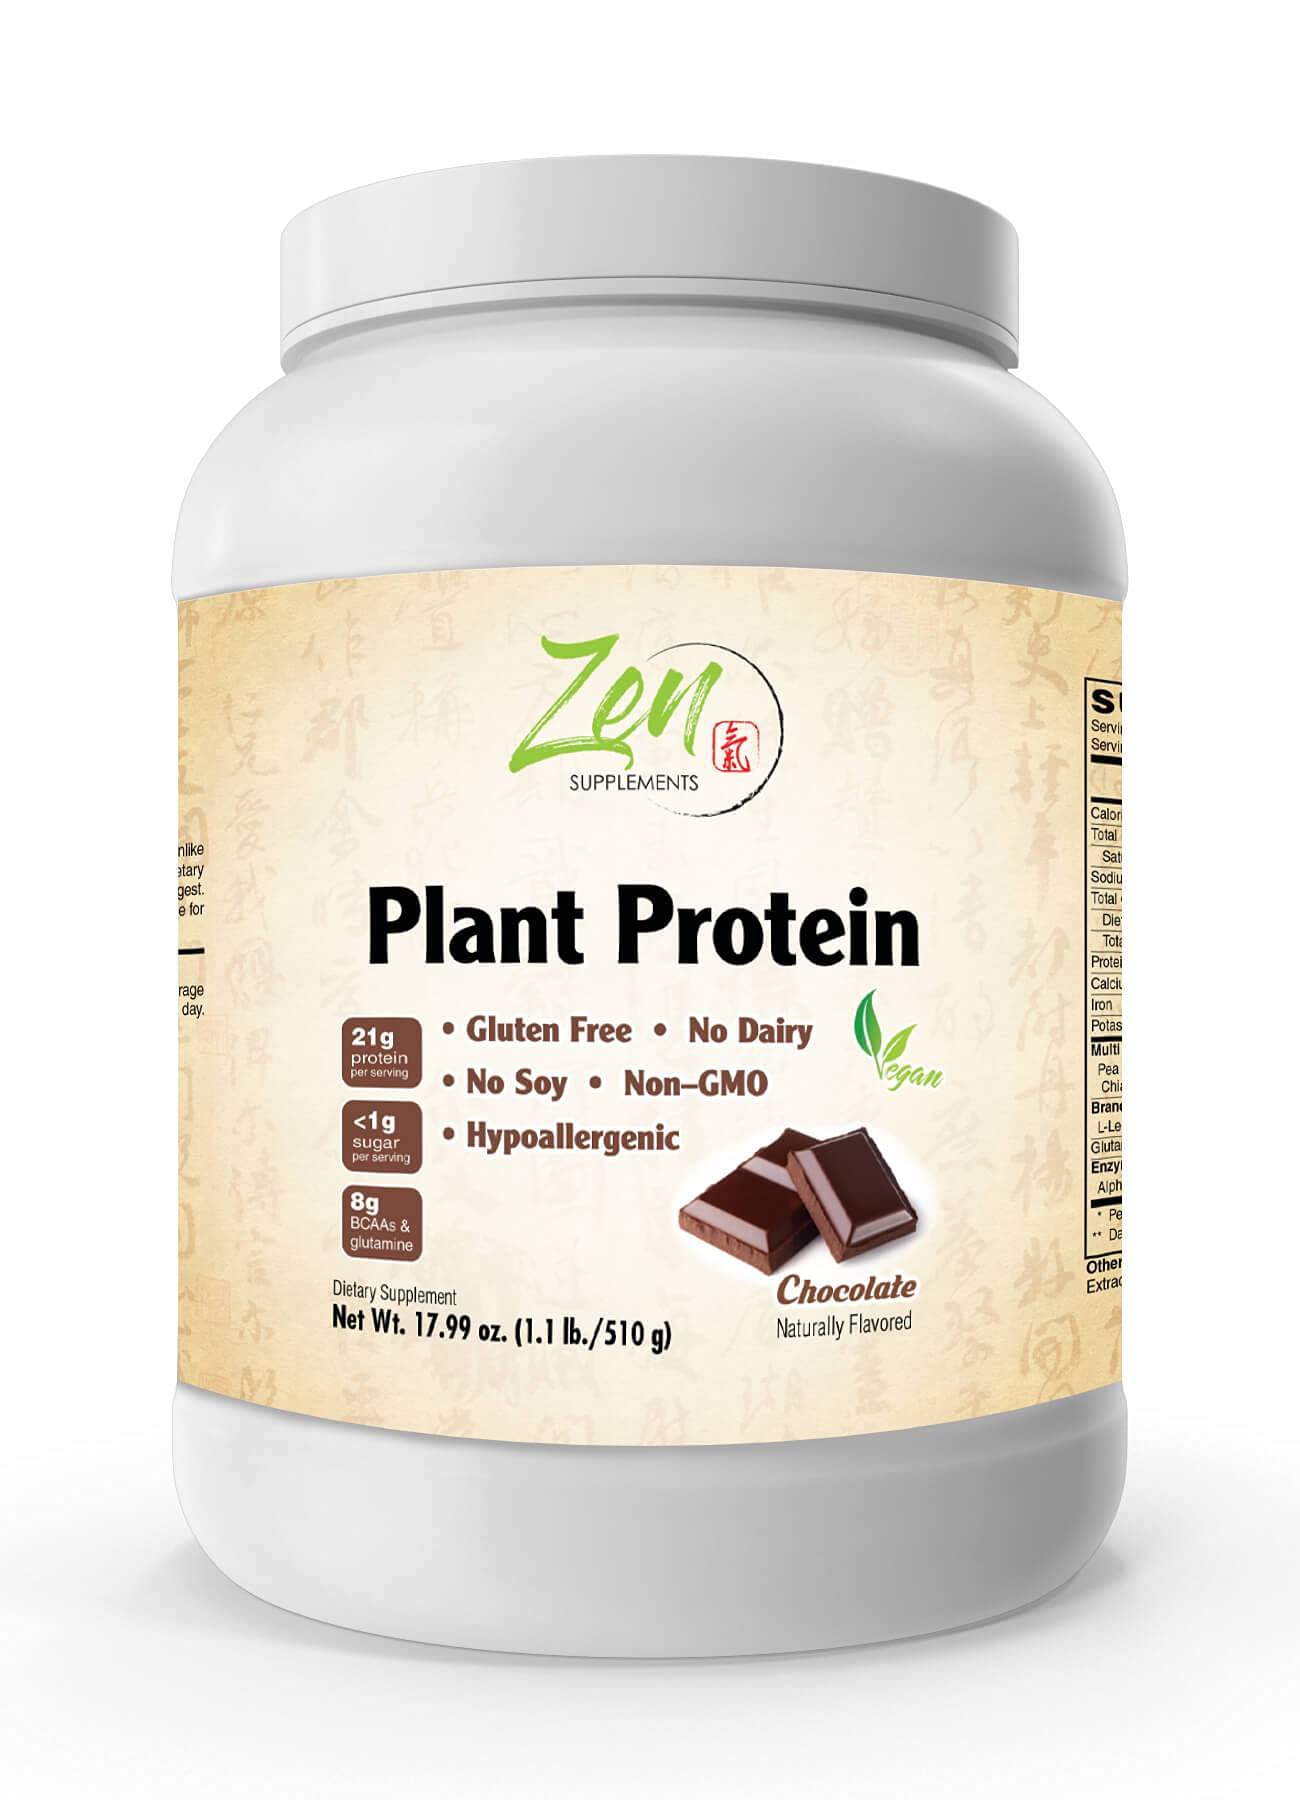 Zen Supplements - Plant Protein-Chocolate 510G 1.1LB -Powder - 23 Grams of Protein Per Serving -Vegan, Low Net Carbs, Non Dairy, Gluten Free, Lactose Free, No Sugar Added, Soy Free, Kosher, Non-GMO